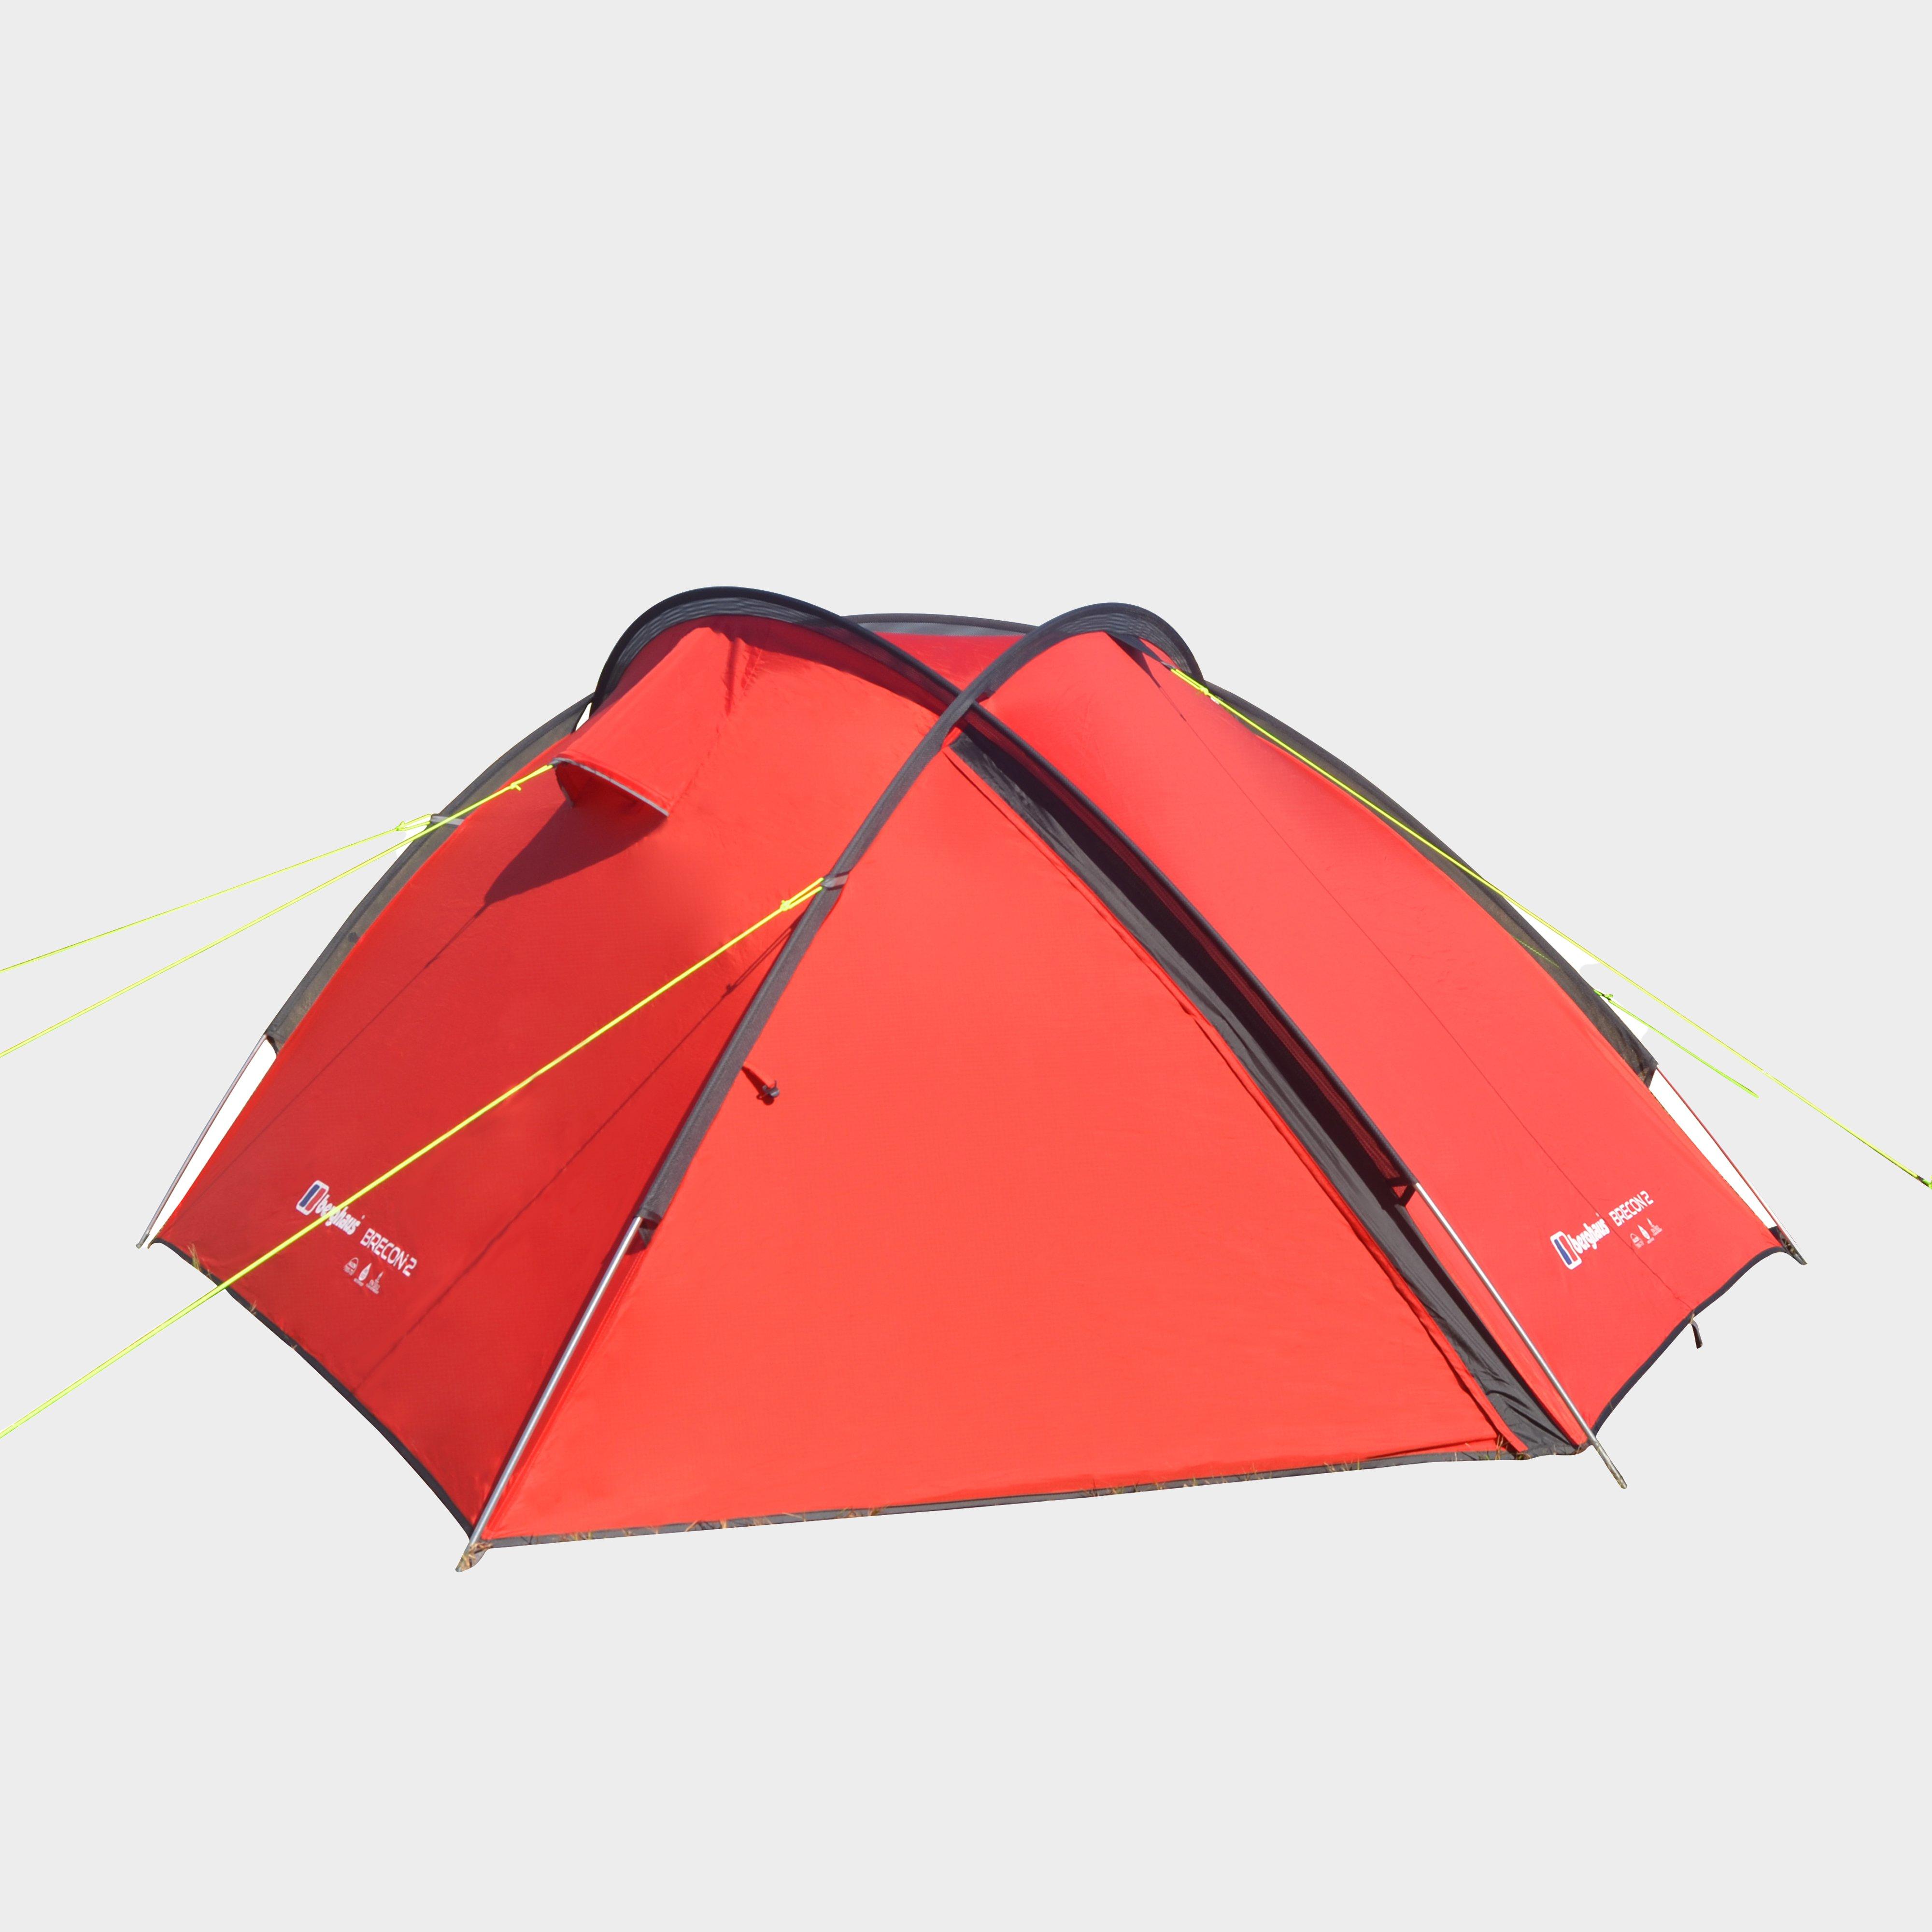 Berghaus Brecon 2 Tent - Red/red  Red/red